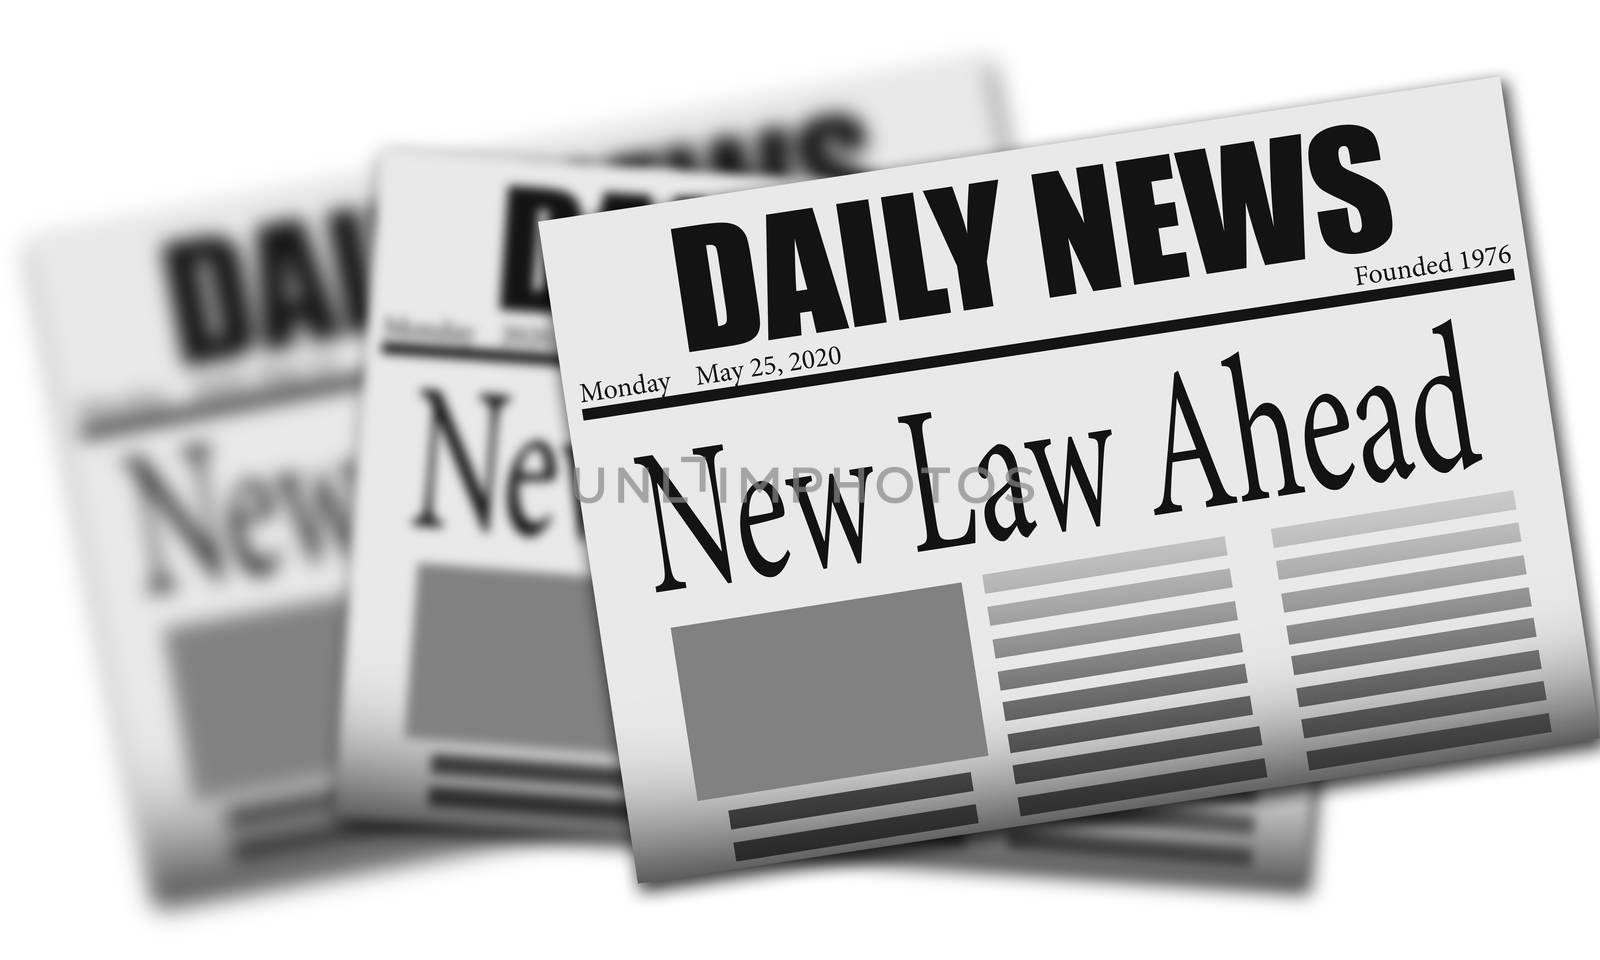 New law take effect as newspaper headline by tang90246